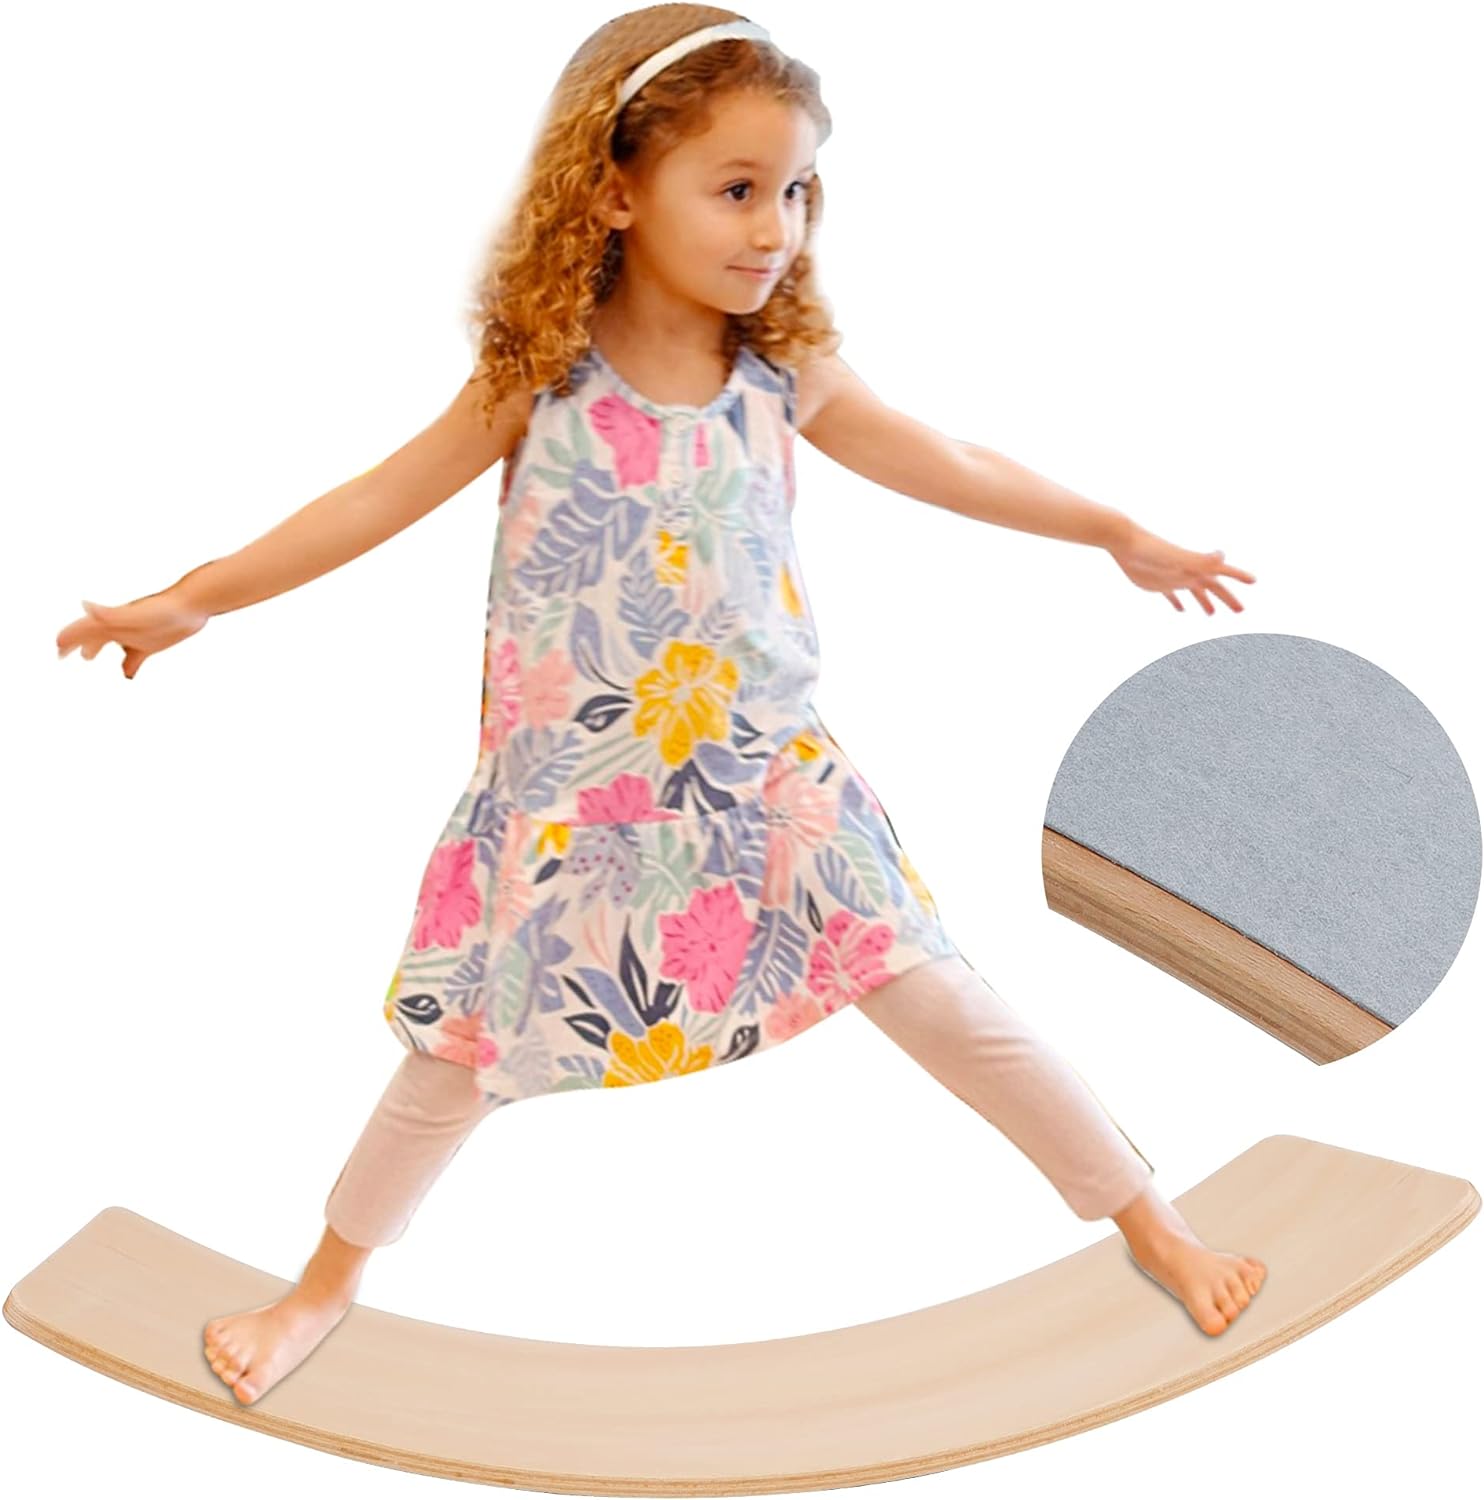 Wobble Board can be used as a bridge